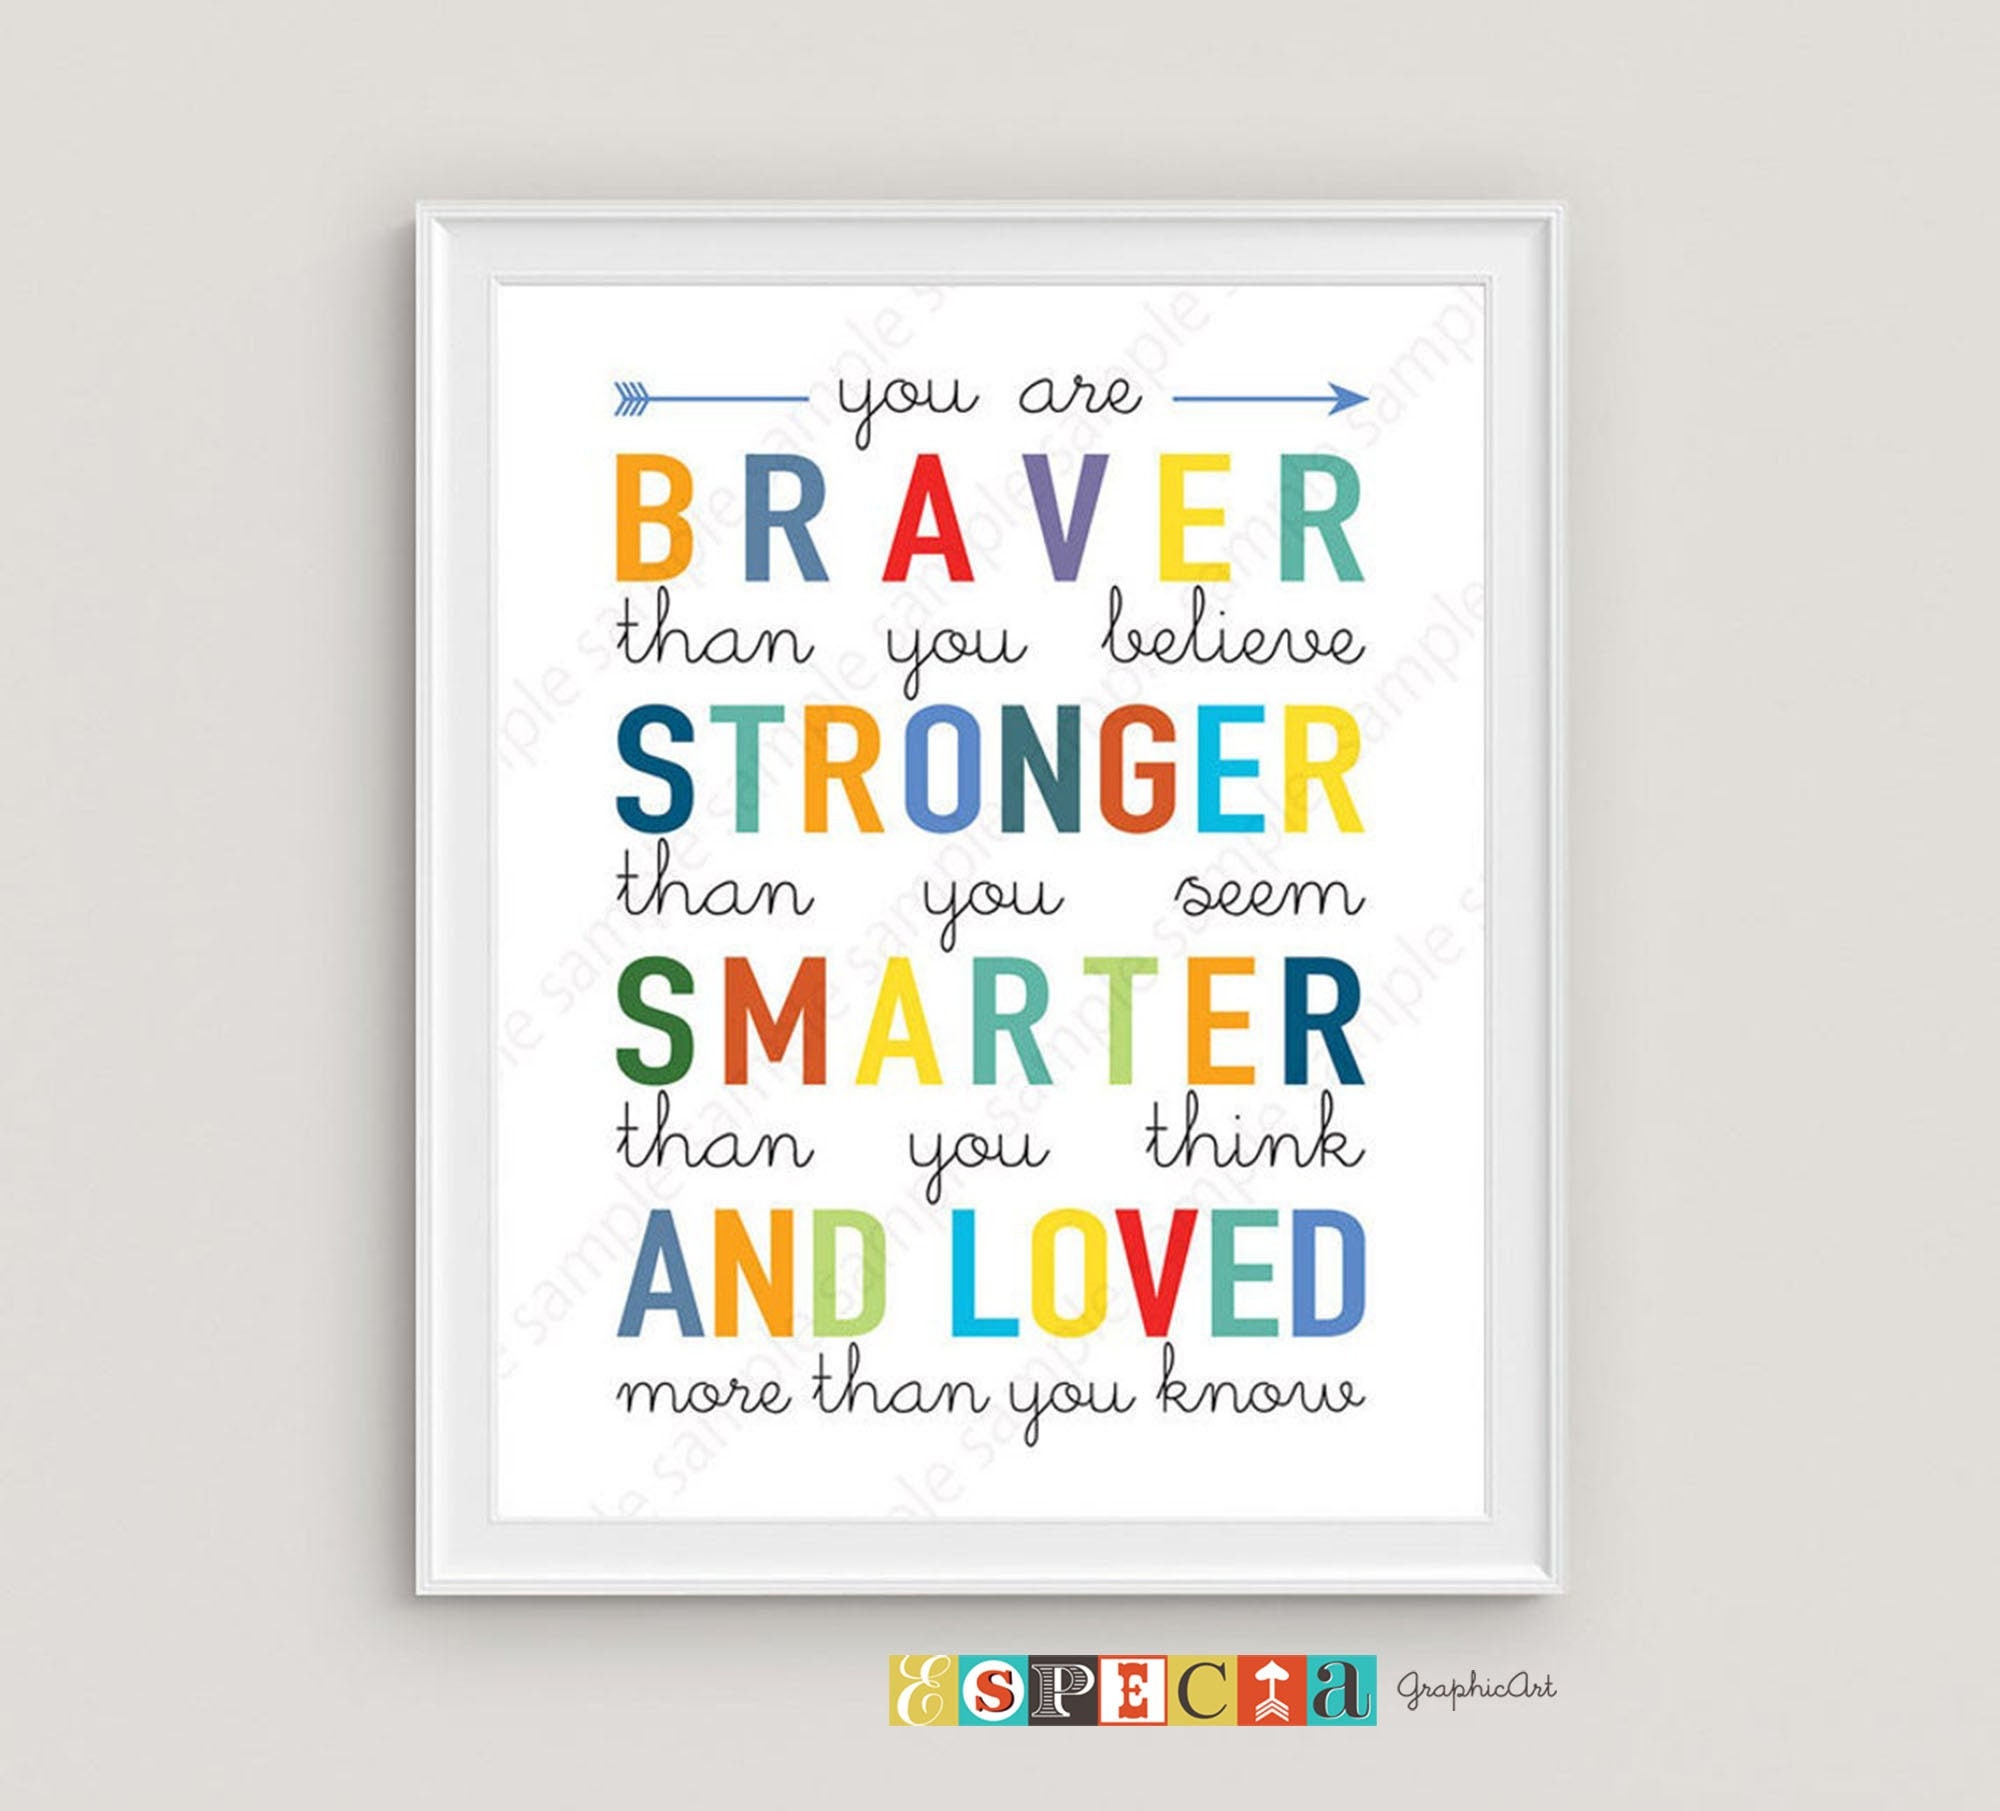 Winnie the Pooh Quote for DIY Kids Room Decor Printable Wall - Etsy